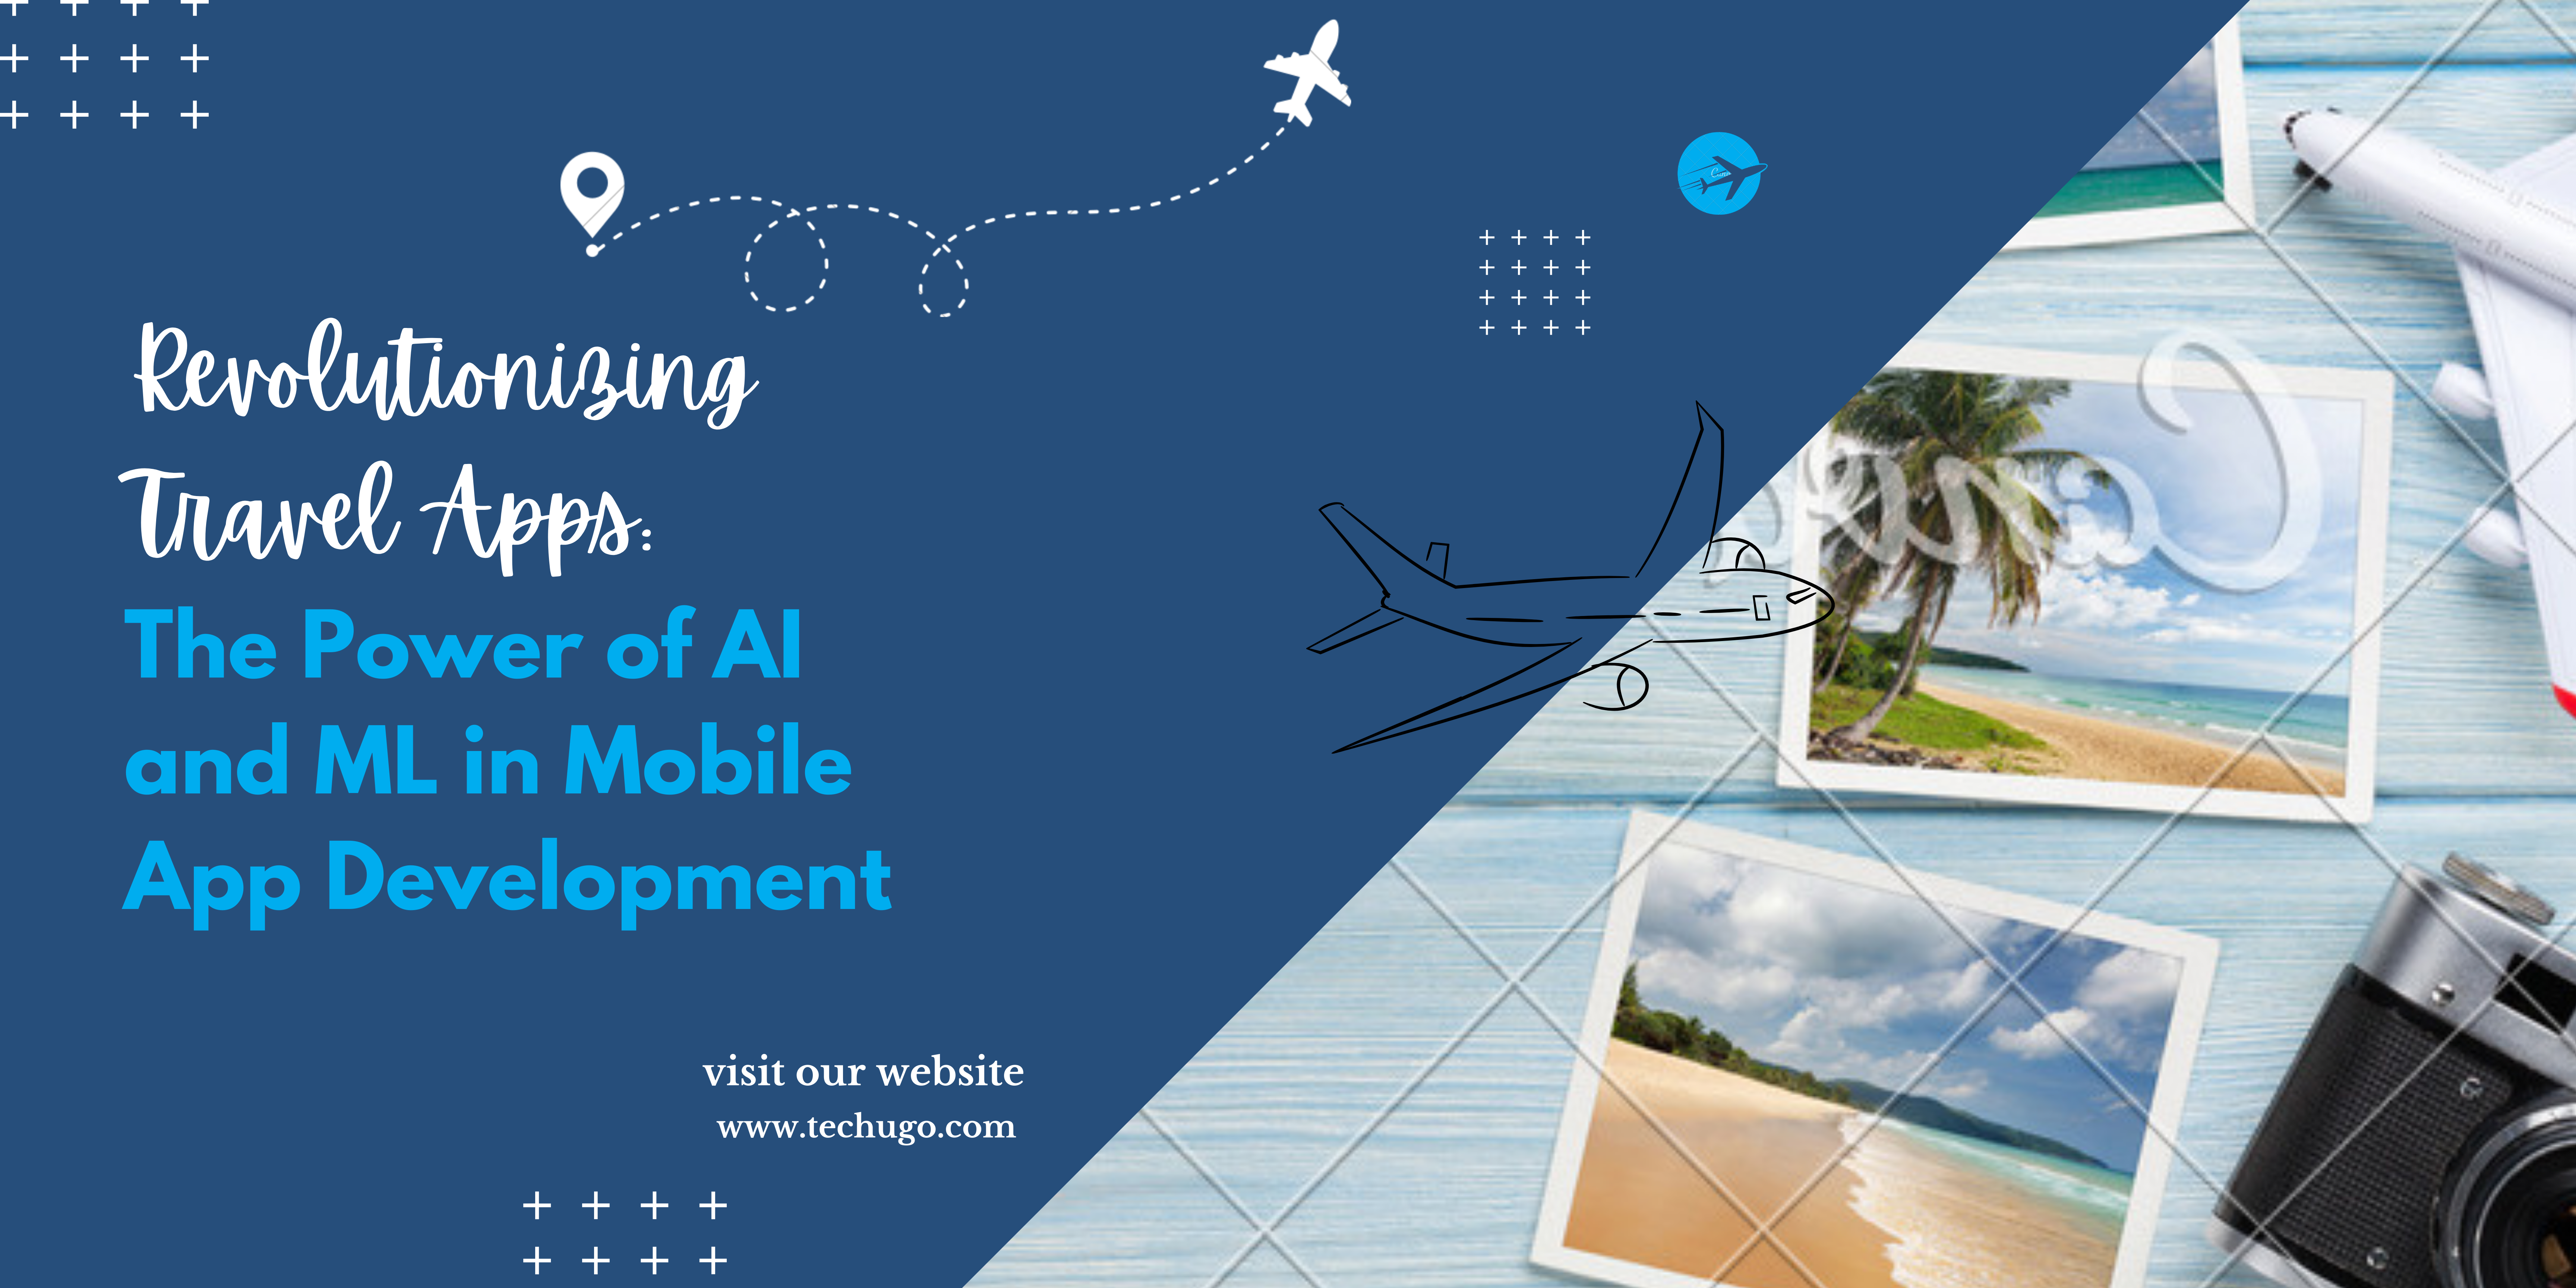 Revolutionizing Travel Apps: The Power of AI and ML in Mobile App Development